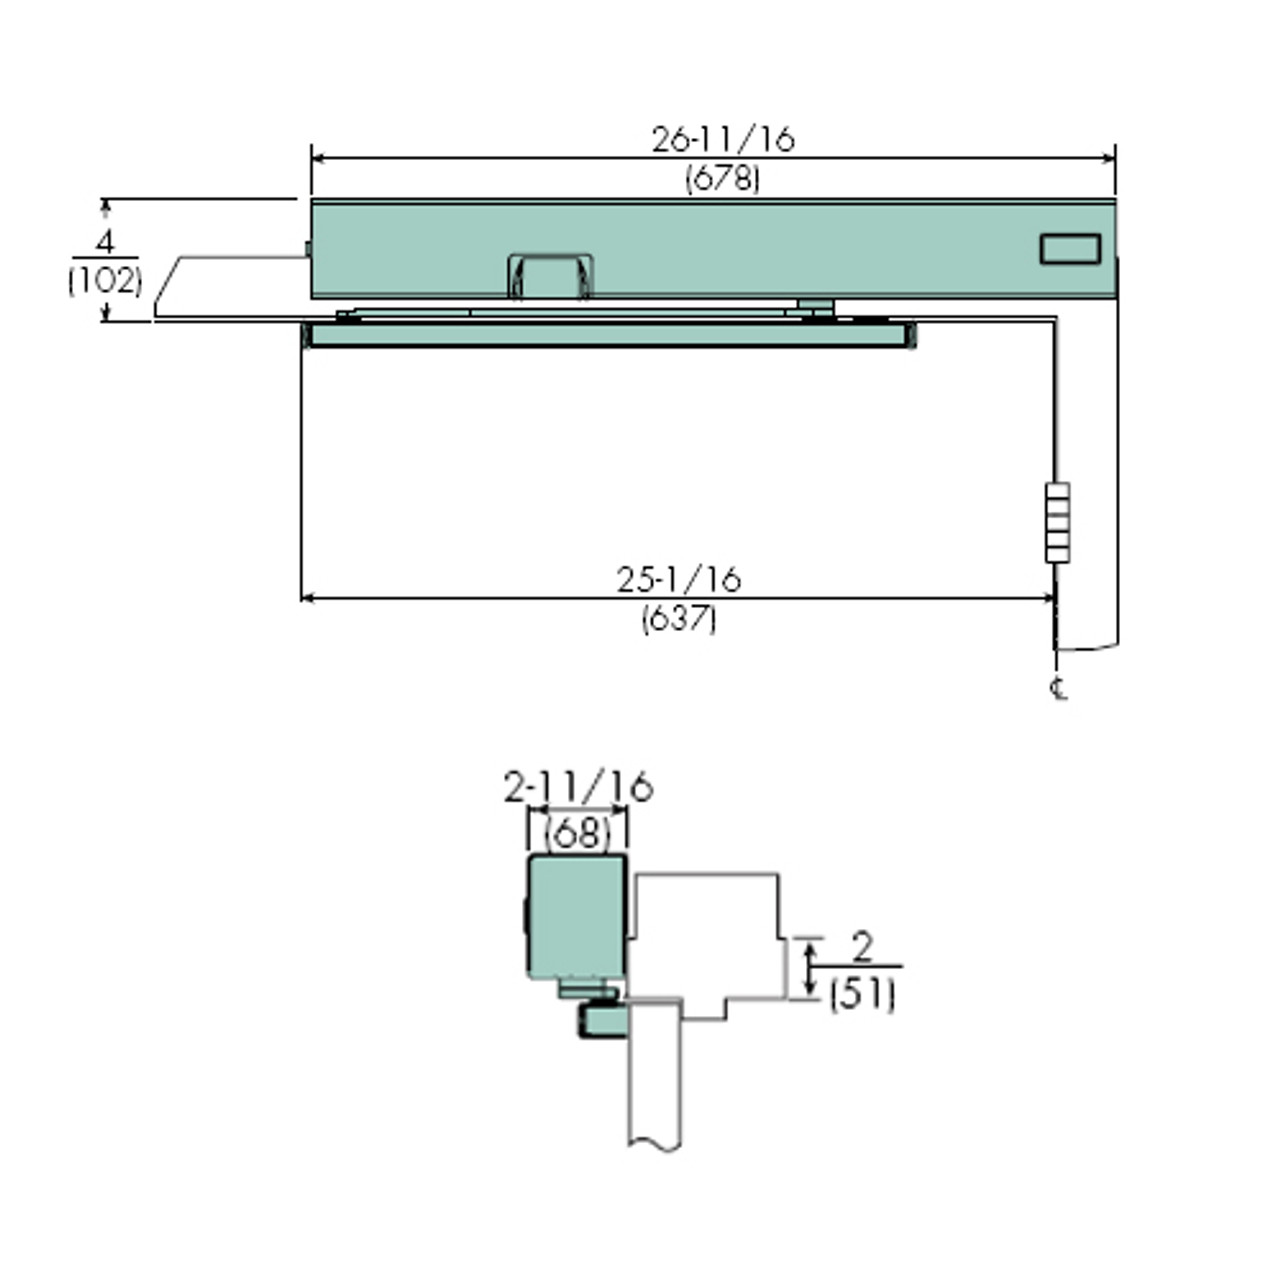 7154SZ-RH-120VAC-691 Norton 7100SZ Series Safe Zone Multi-Point Closer/Holder with Motion Sensor and Pull Side Double Egress Arm and Slide Track in Dull Bronze Finish